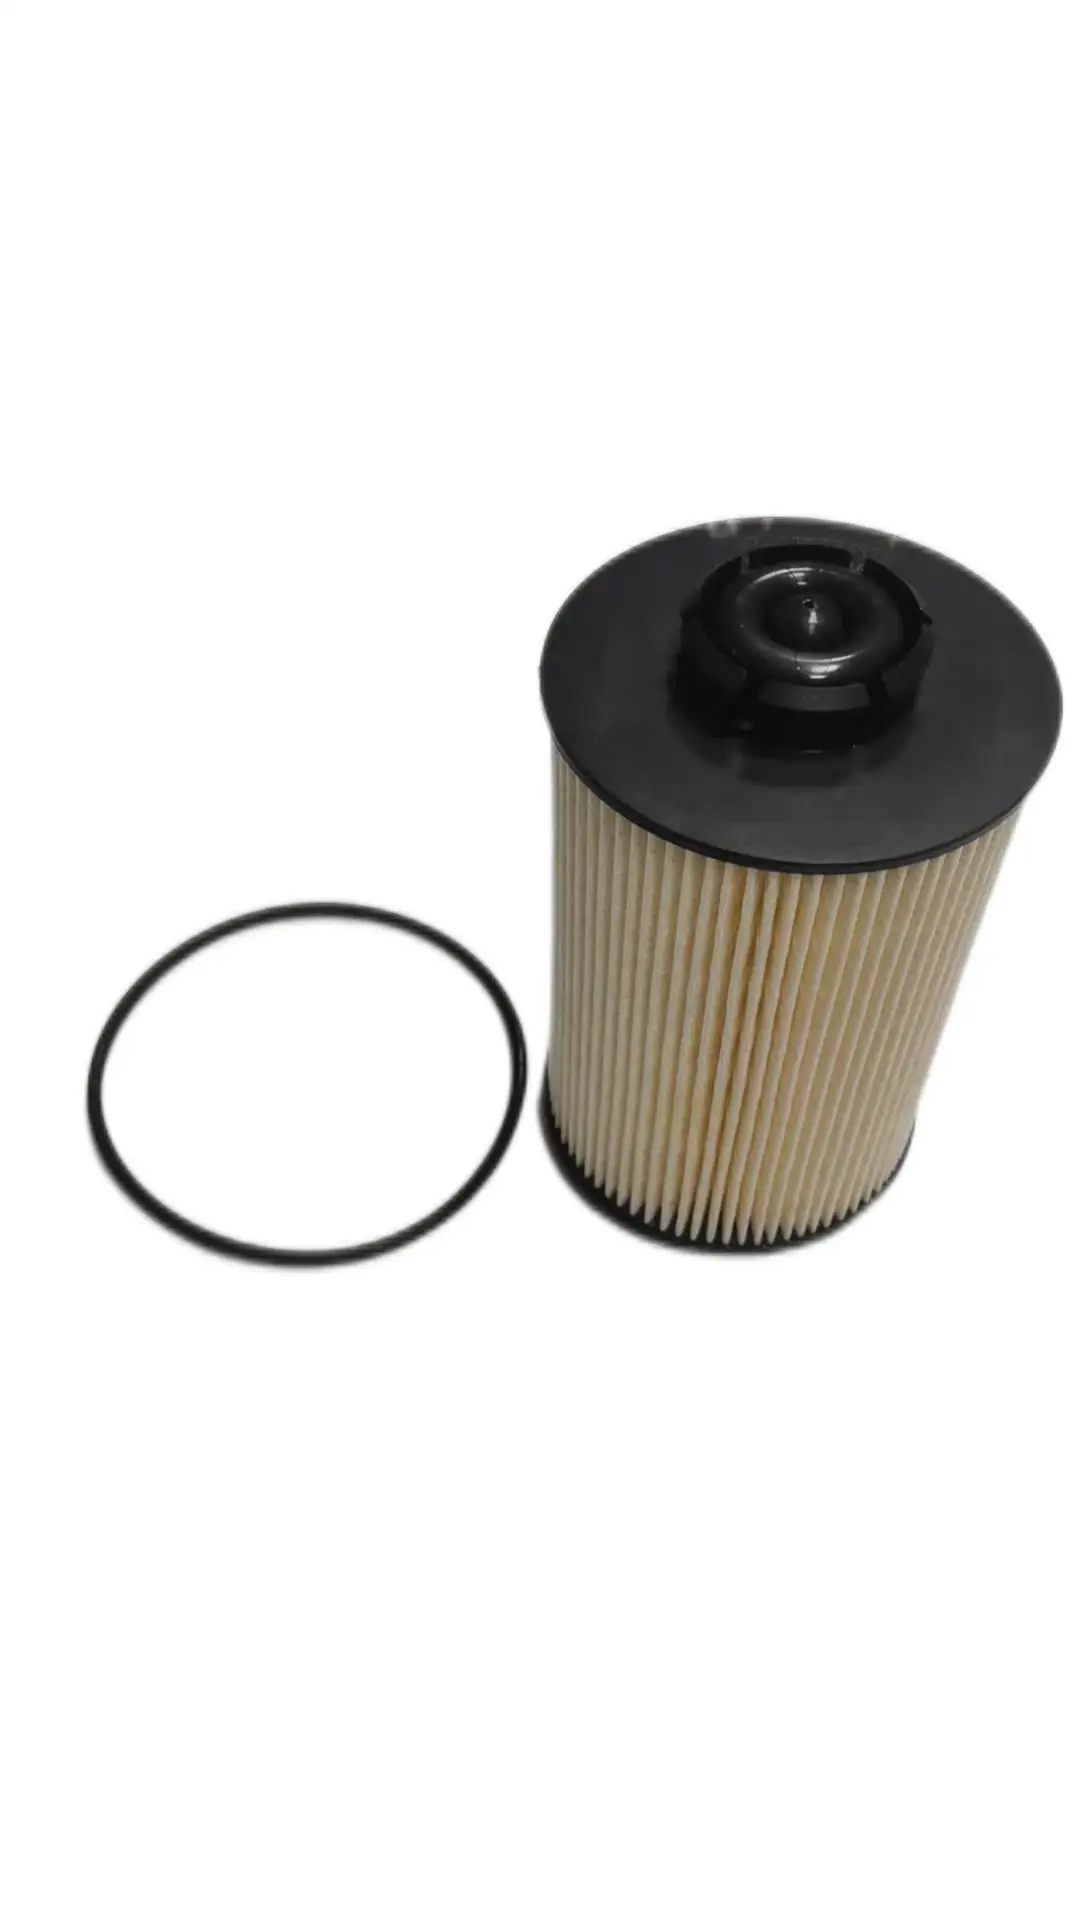 

Suitable for Volvo RENAULT Truck FE FL Fuel Filter OEM 20998805 20796775 21040558 21276079 7420796772 7420998806 PU1058X PF7938